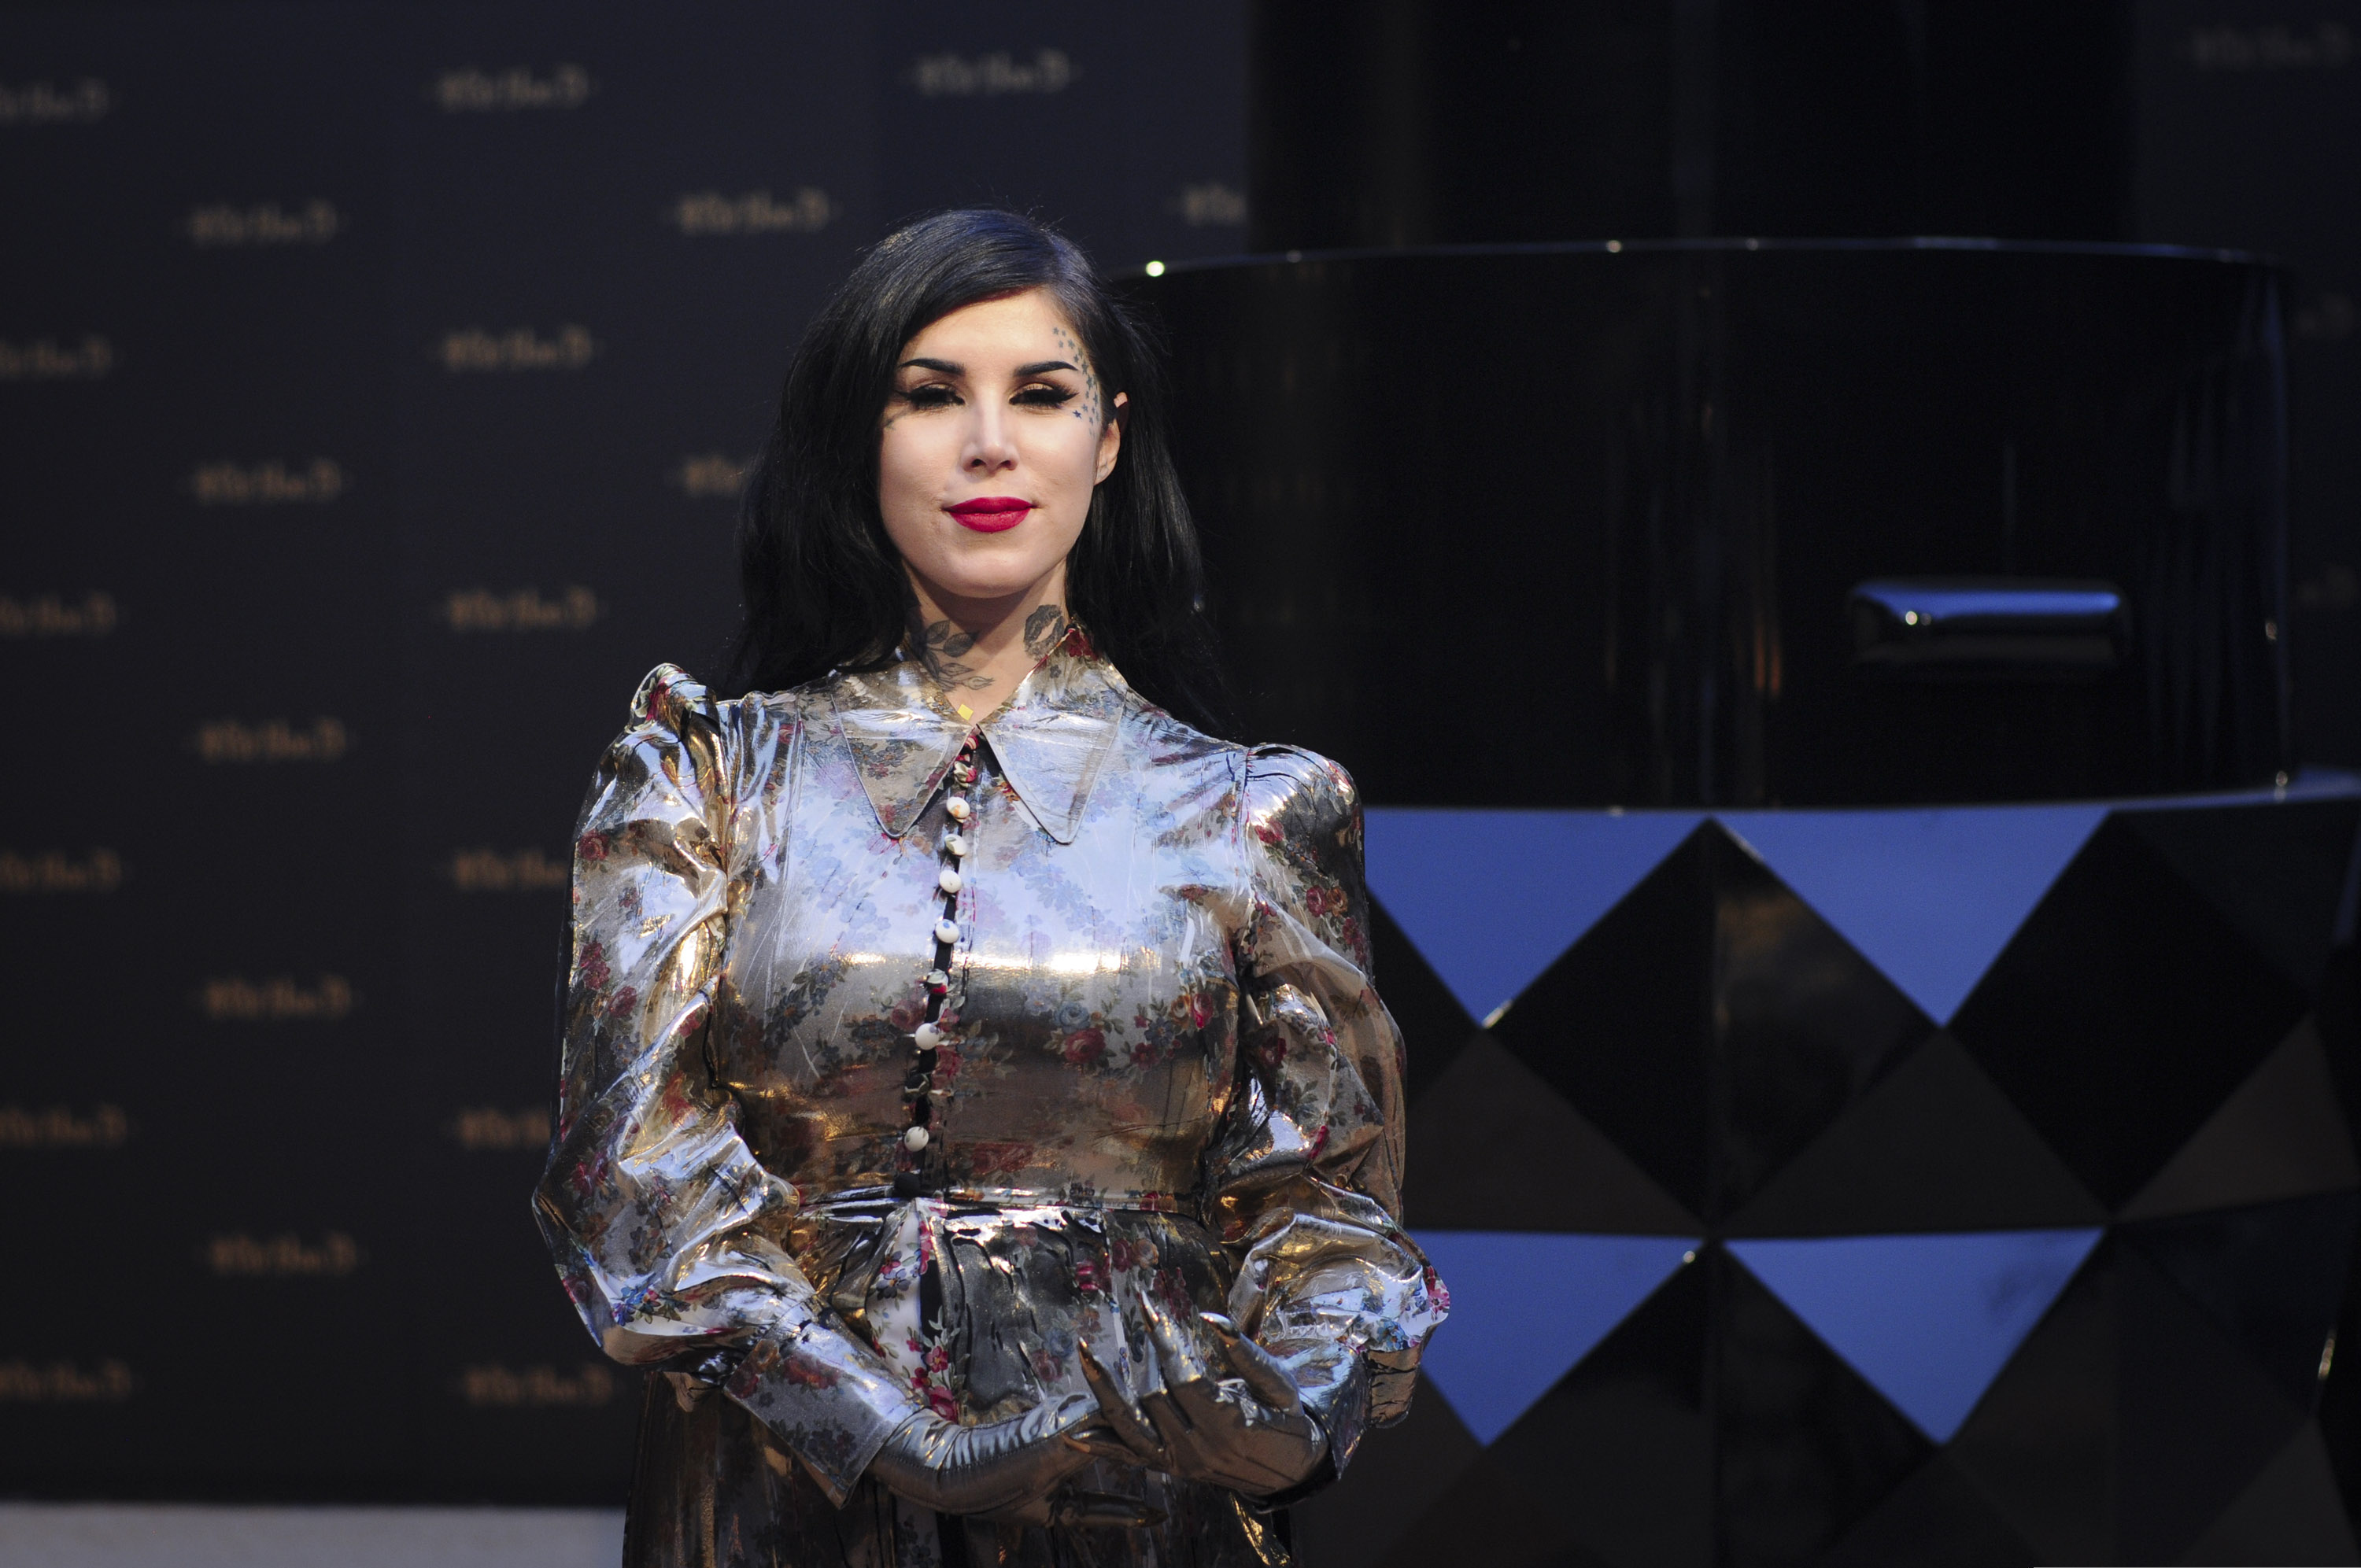 Kat Von D gets baptized 1 year after renouncing witchcraft